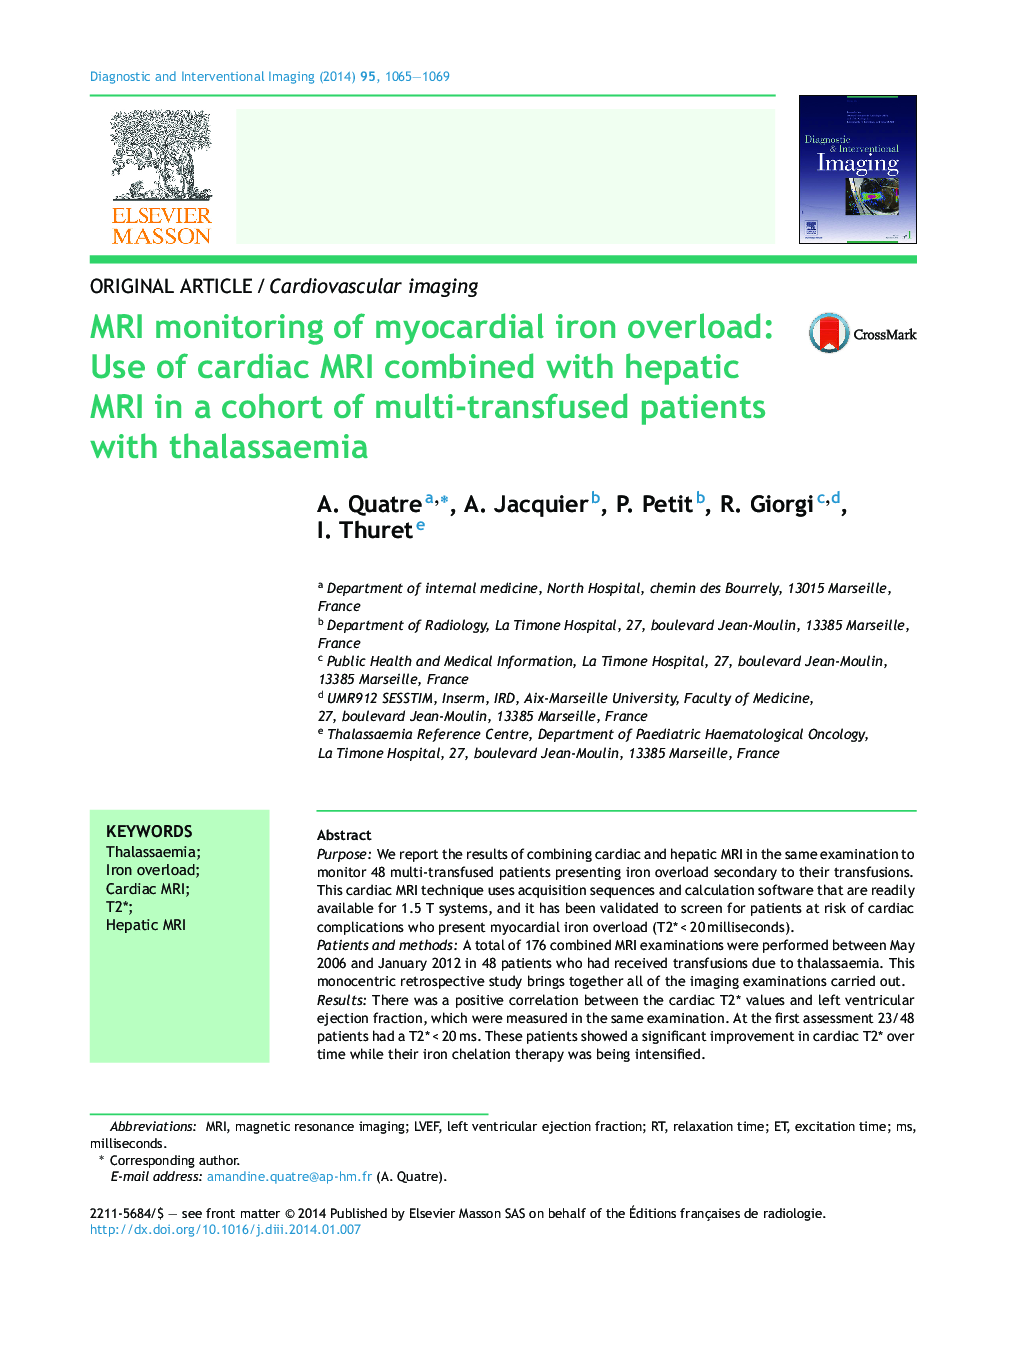 MRI monitoring of myocardial iron overload: Use of cardiac MRI combined with hepatic MRI in a cohort of multi-transfused patients with thalassaemia